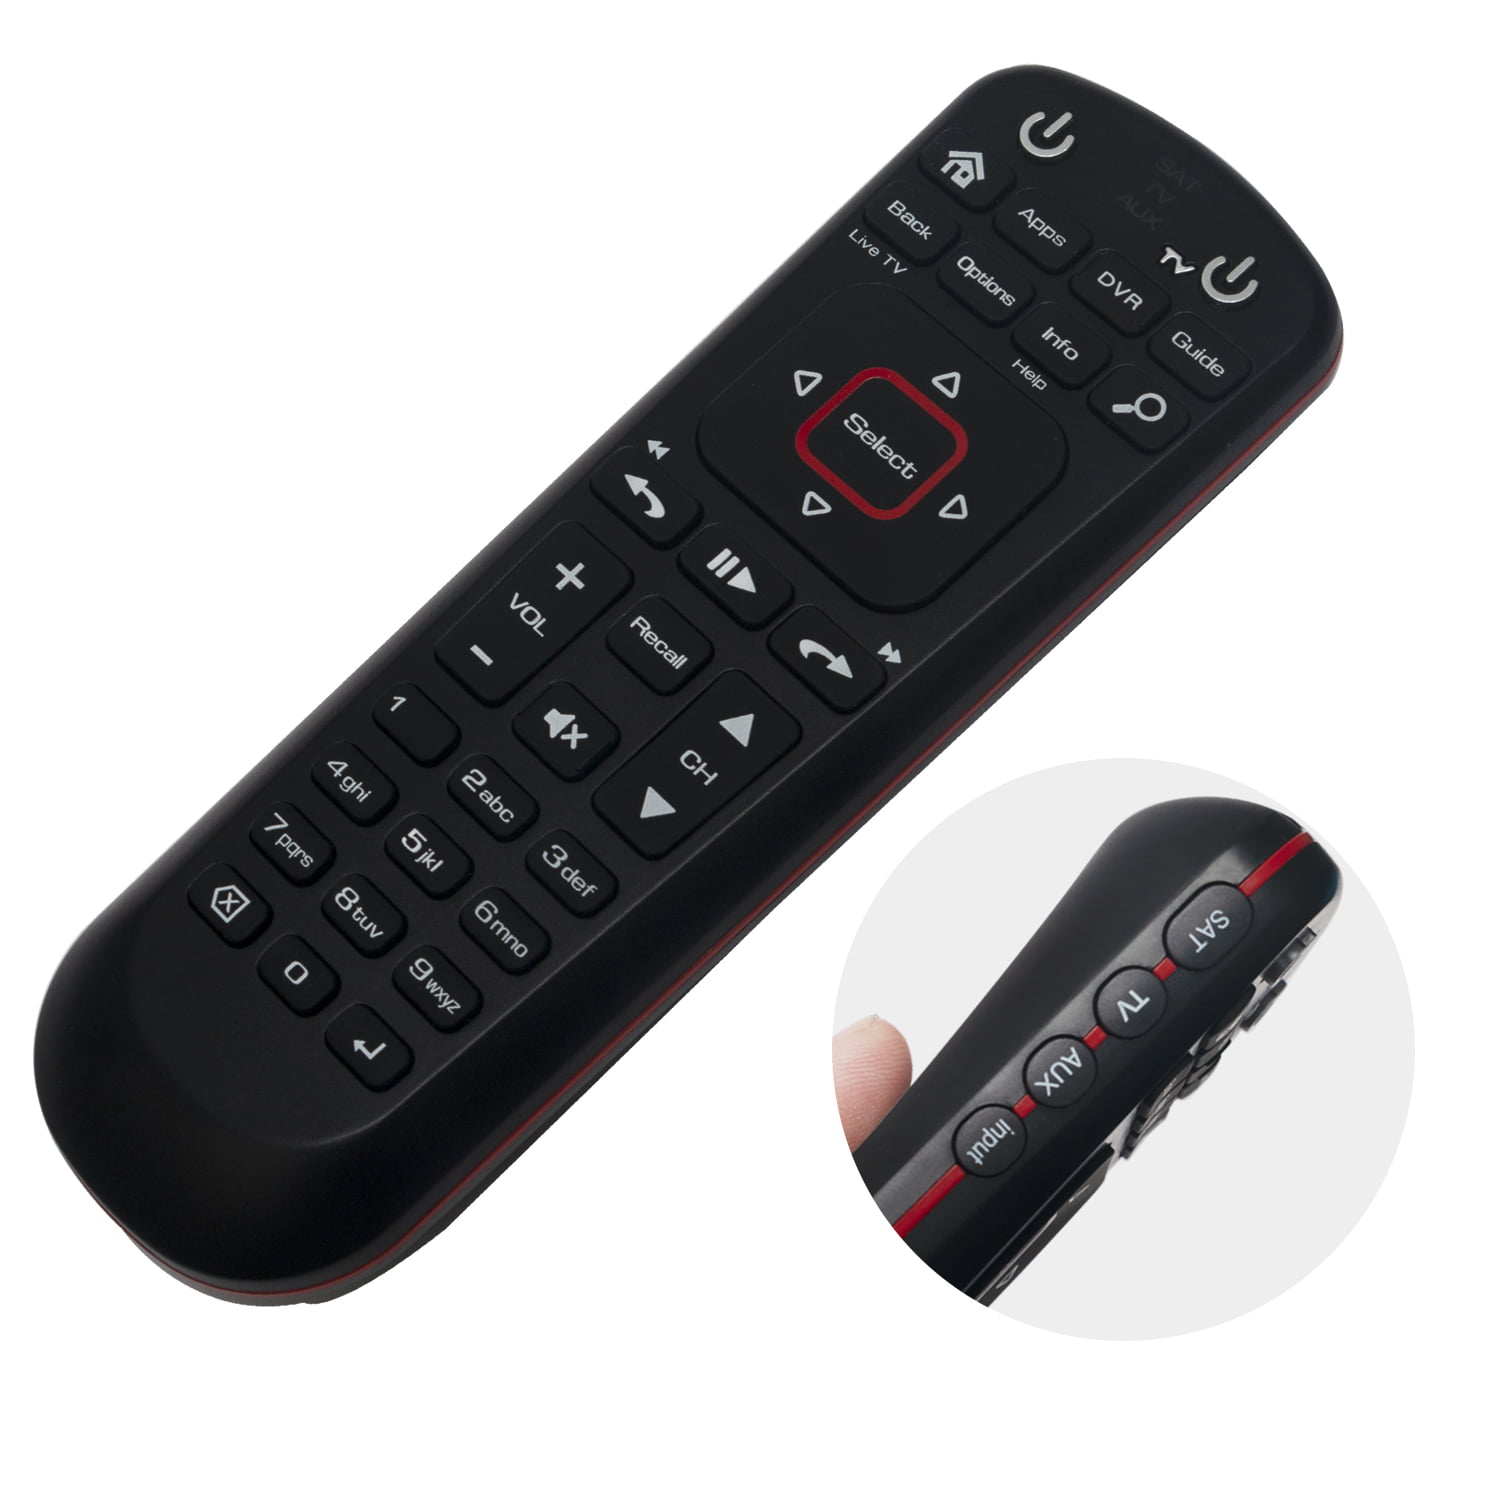 New Replaced Remote Control fit for Dish Network 52.0 Satellite Receiver - Walmart.com - Walmart.com